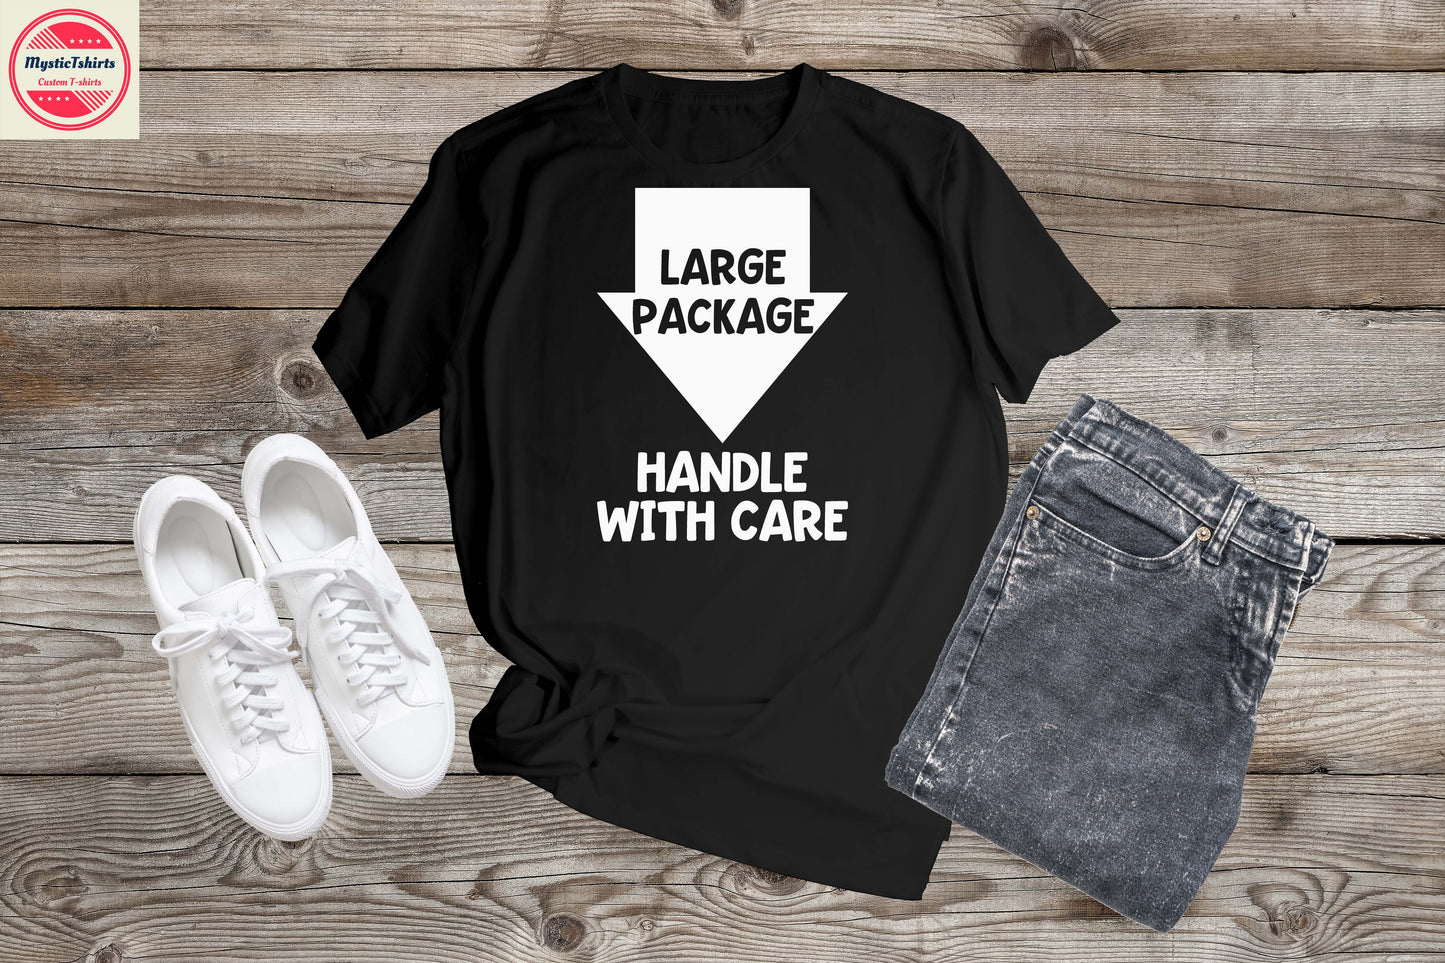 268. LARGE PACKAGE HANDLE WITH CARE, Personalized T-Shirt, Custom Text, Make Your Own Shirt, Custom Tee